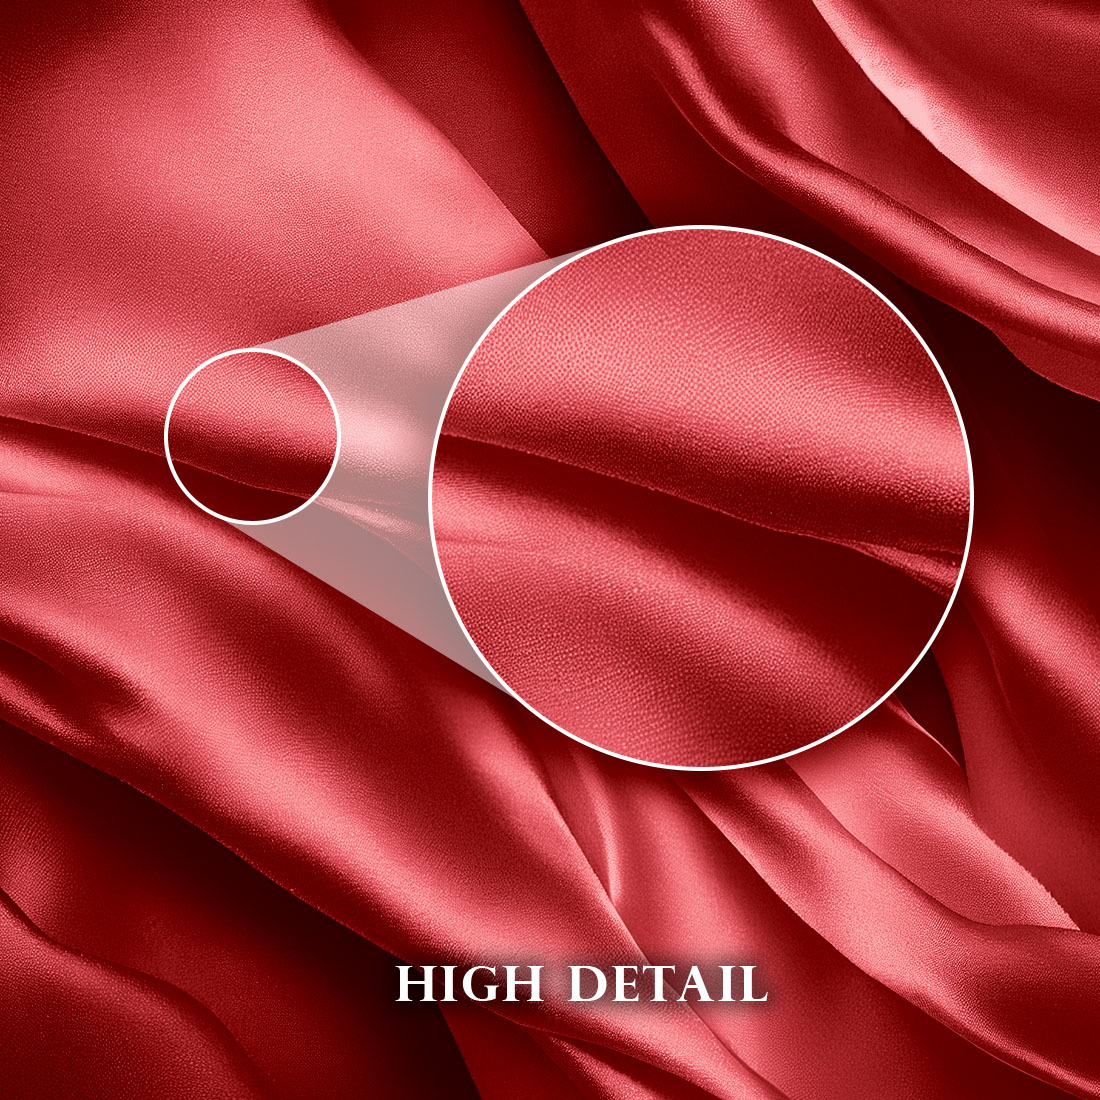 Detail image for background with irresistible red silk.